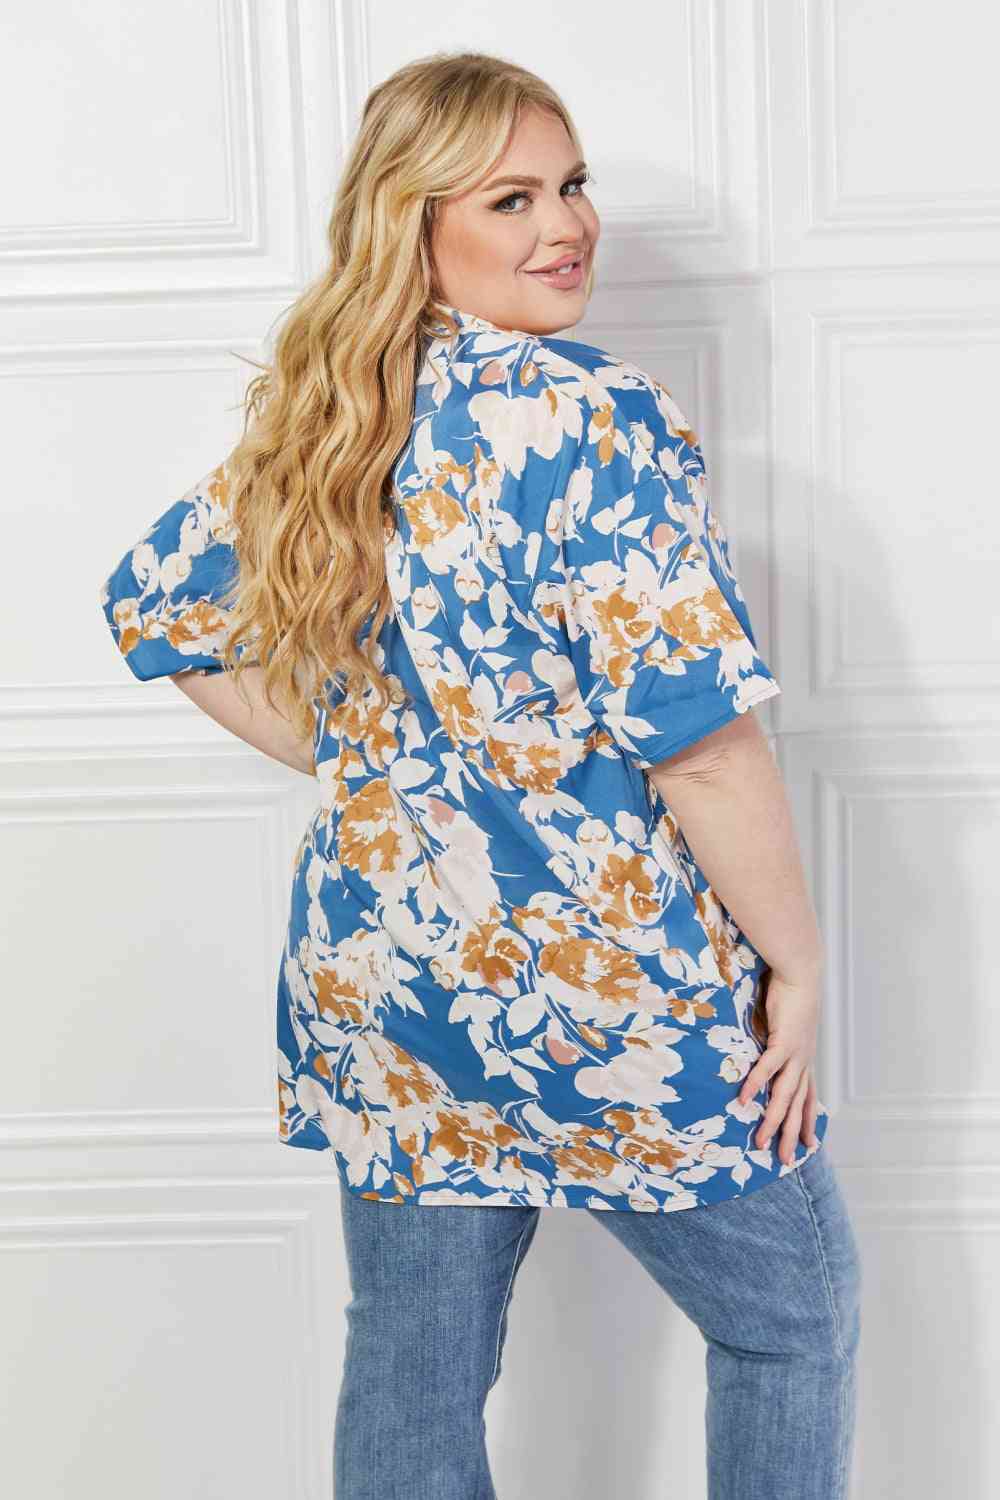 Justin Taylor Time To Grow Floral Kimono in Chambray